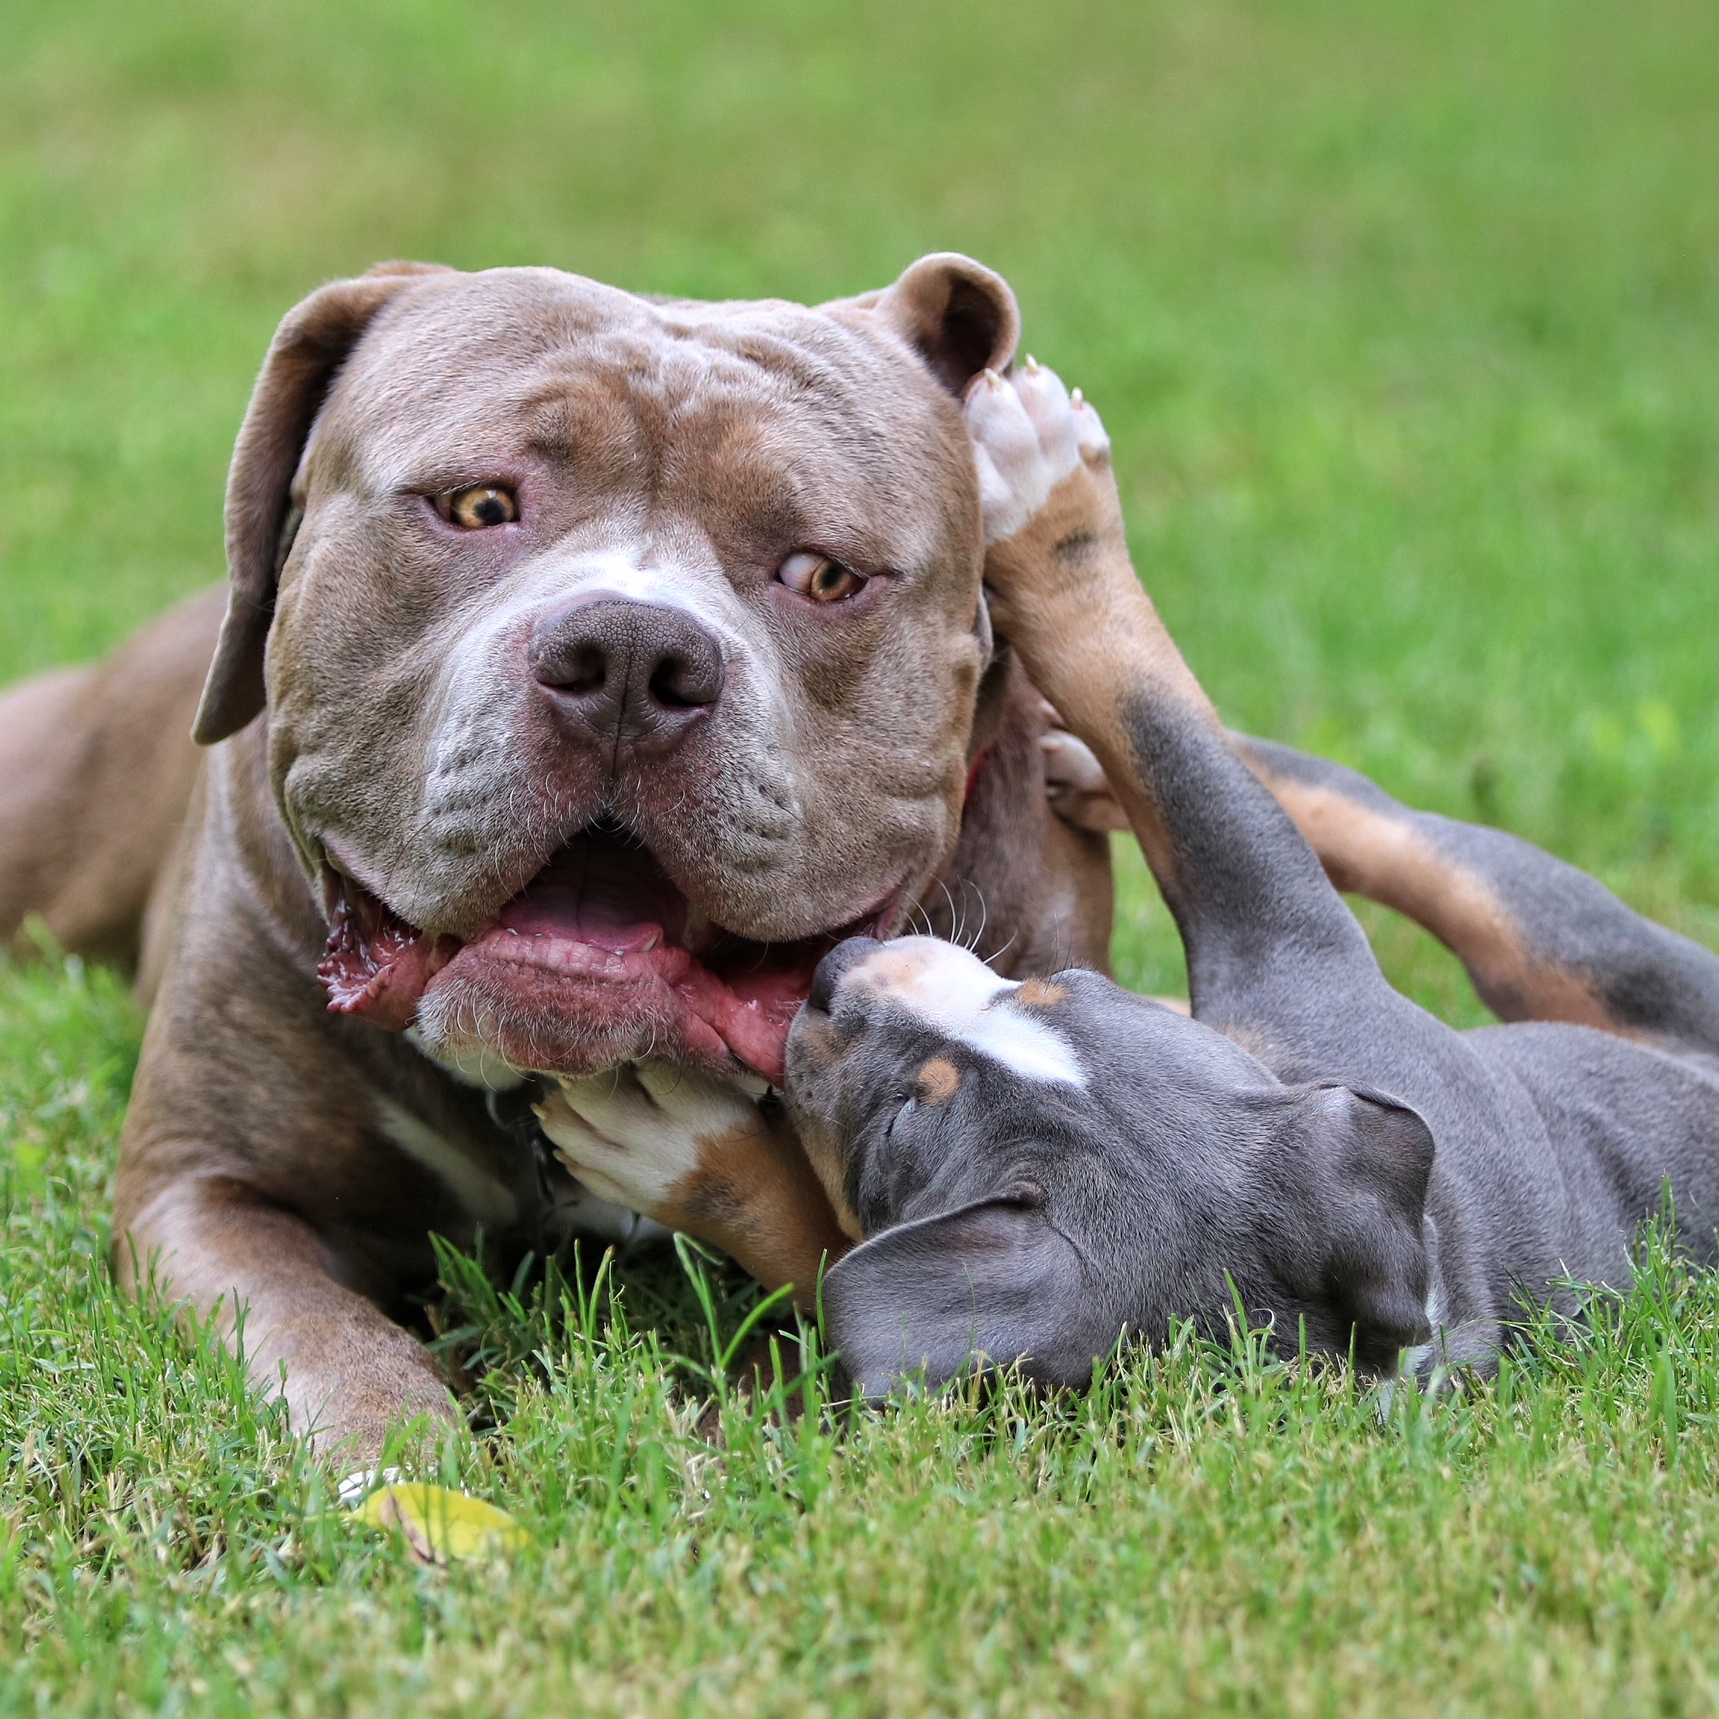 American Bully with floppy ears playing with puppy in the green grass